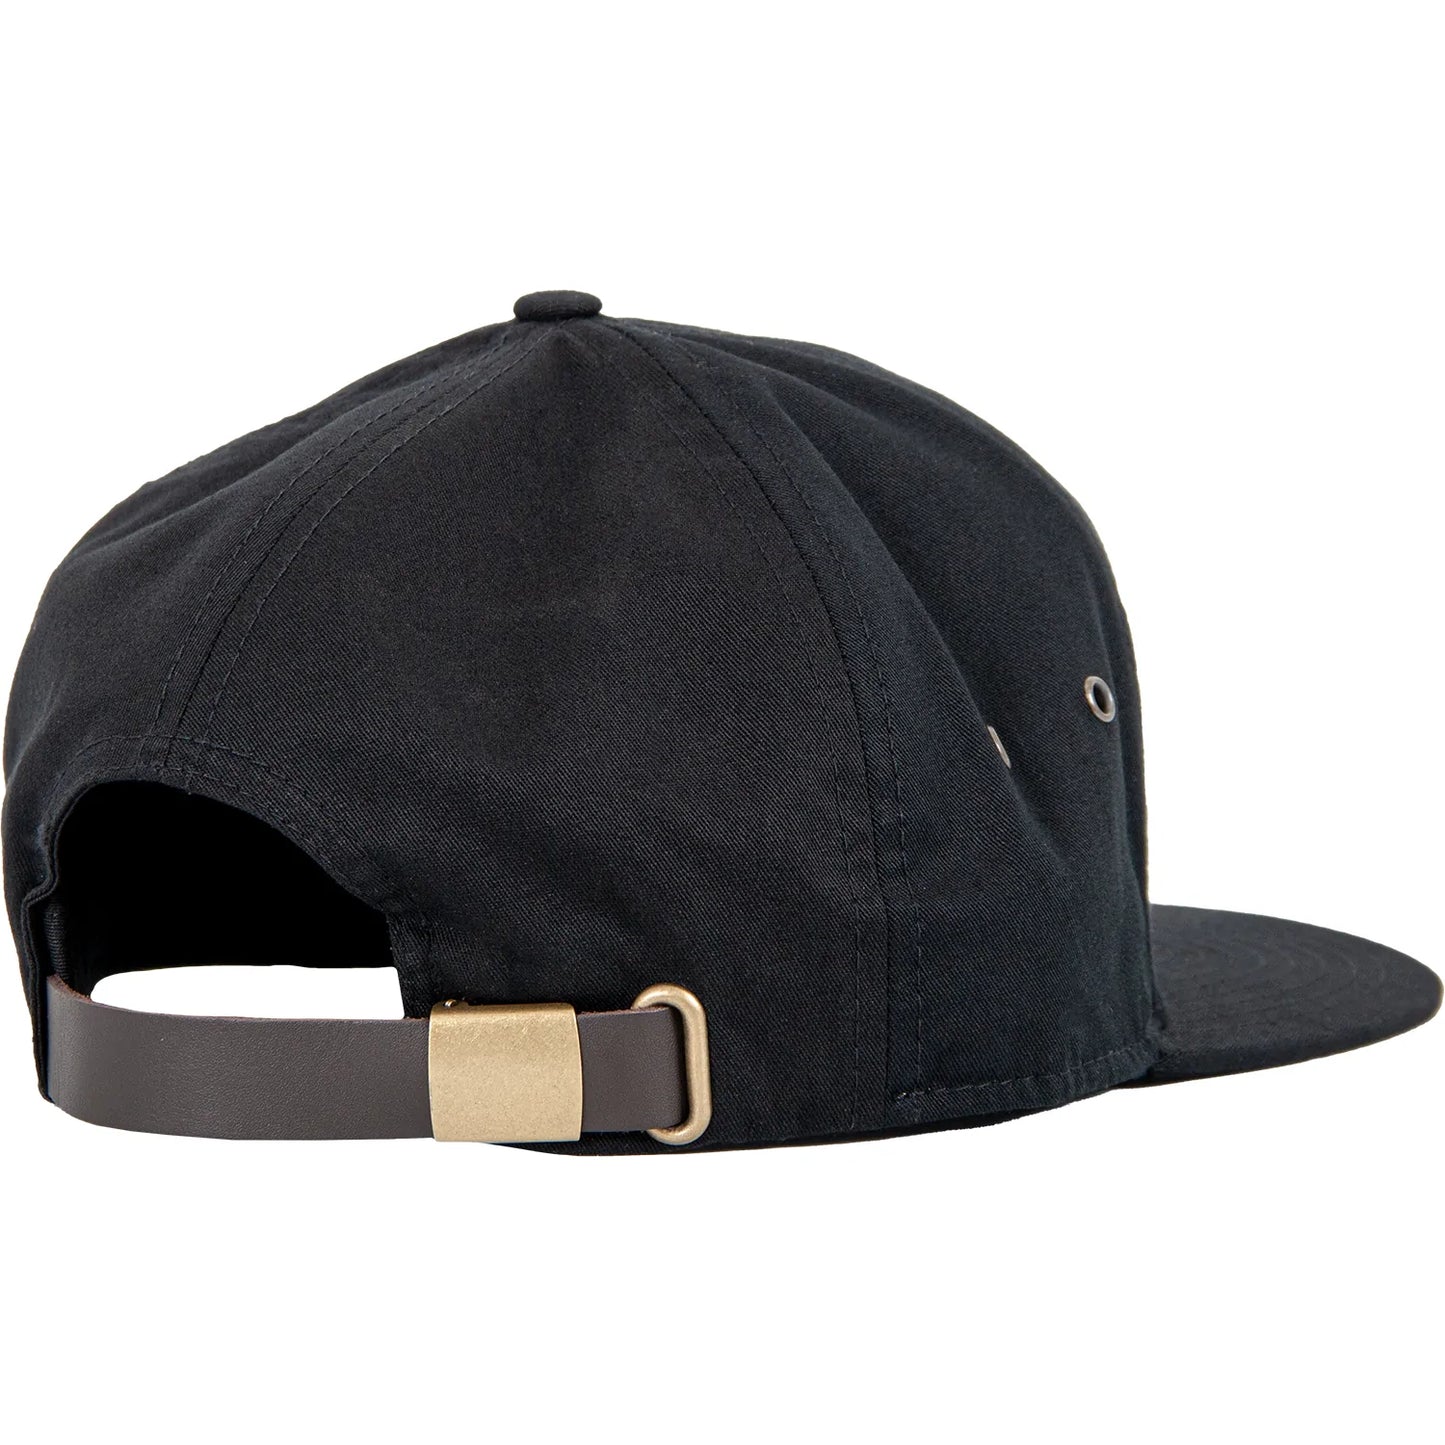 Huk Lab Strapback Hat w/ Leather TriFly Patch